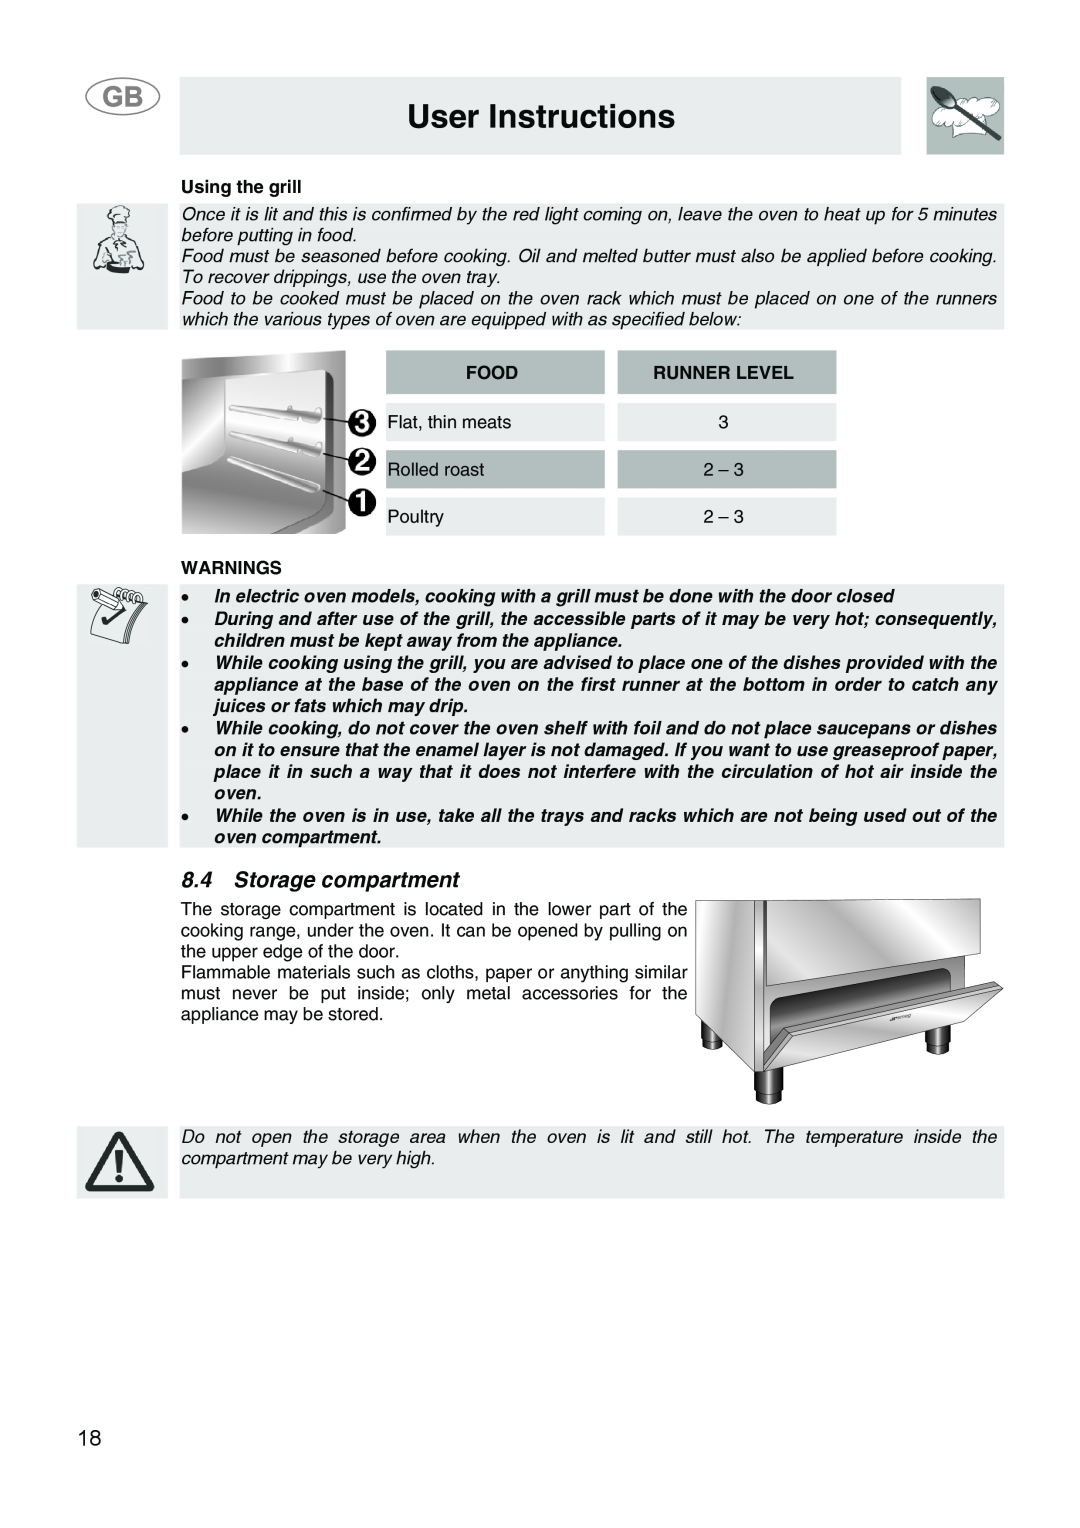 Smeg SA9058X manual Storage compartment, User Instructions, Using the grill, Food, Runner Level, Warnings 